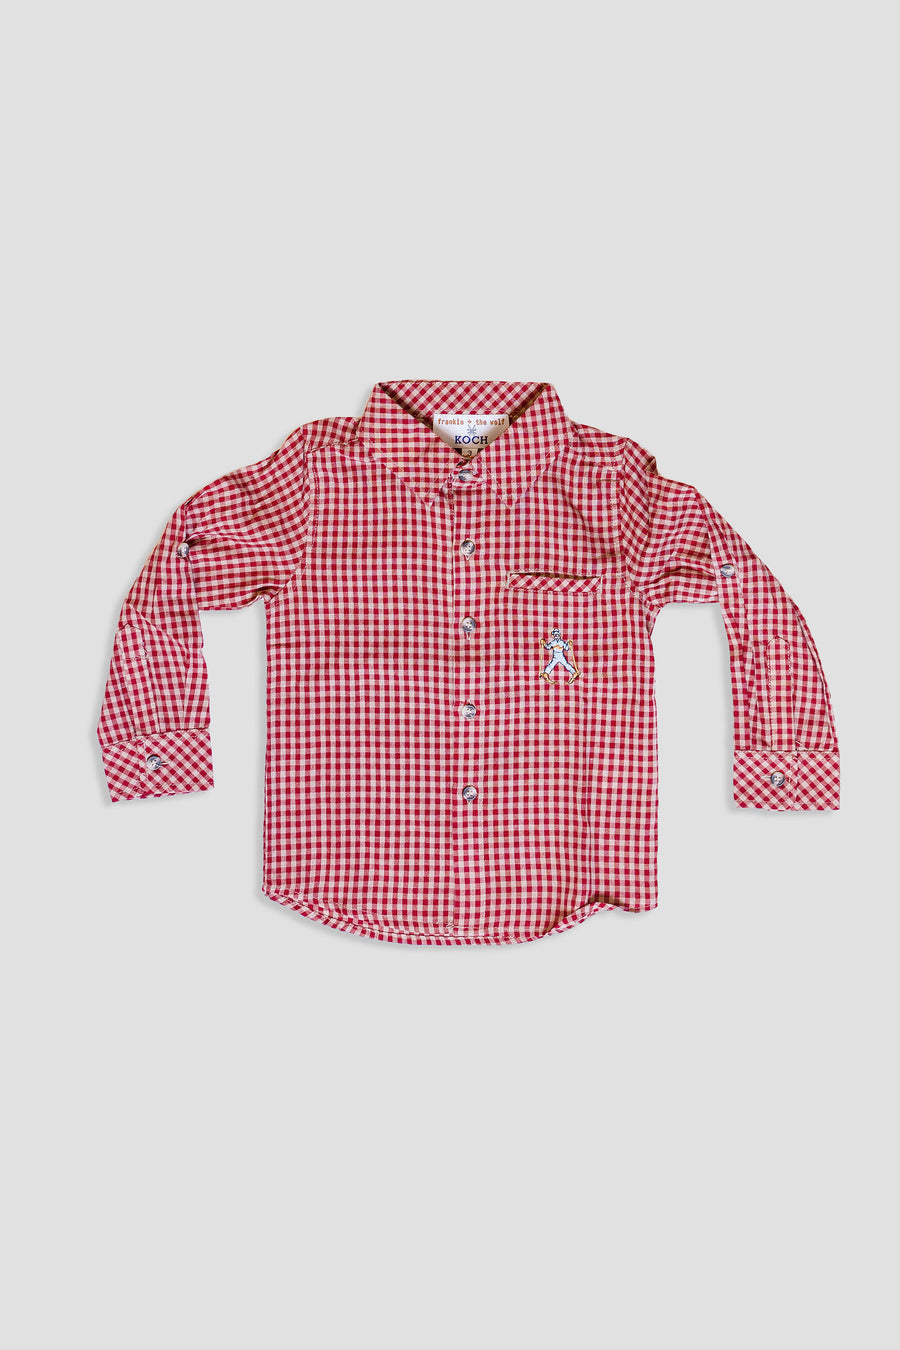 Cooper Top Aspen Red Check *Limited*Edition*